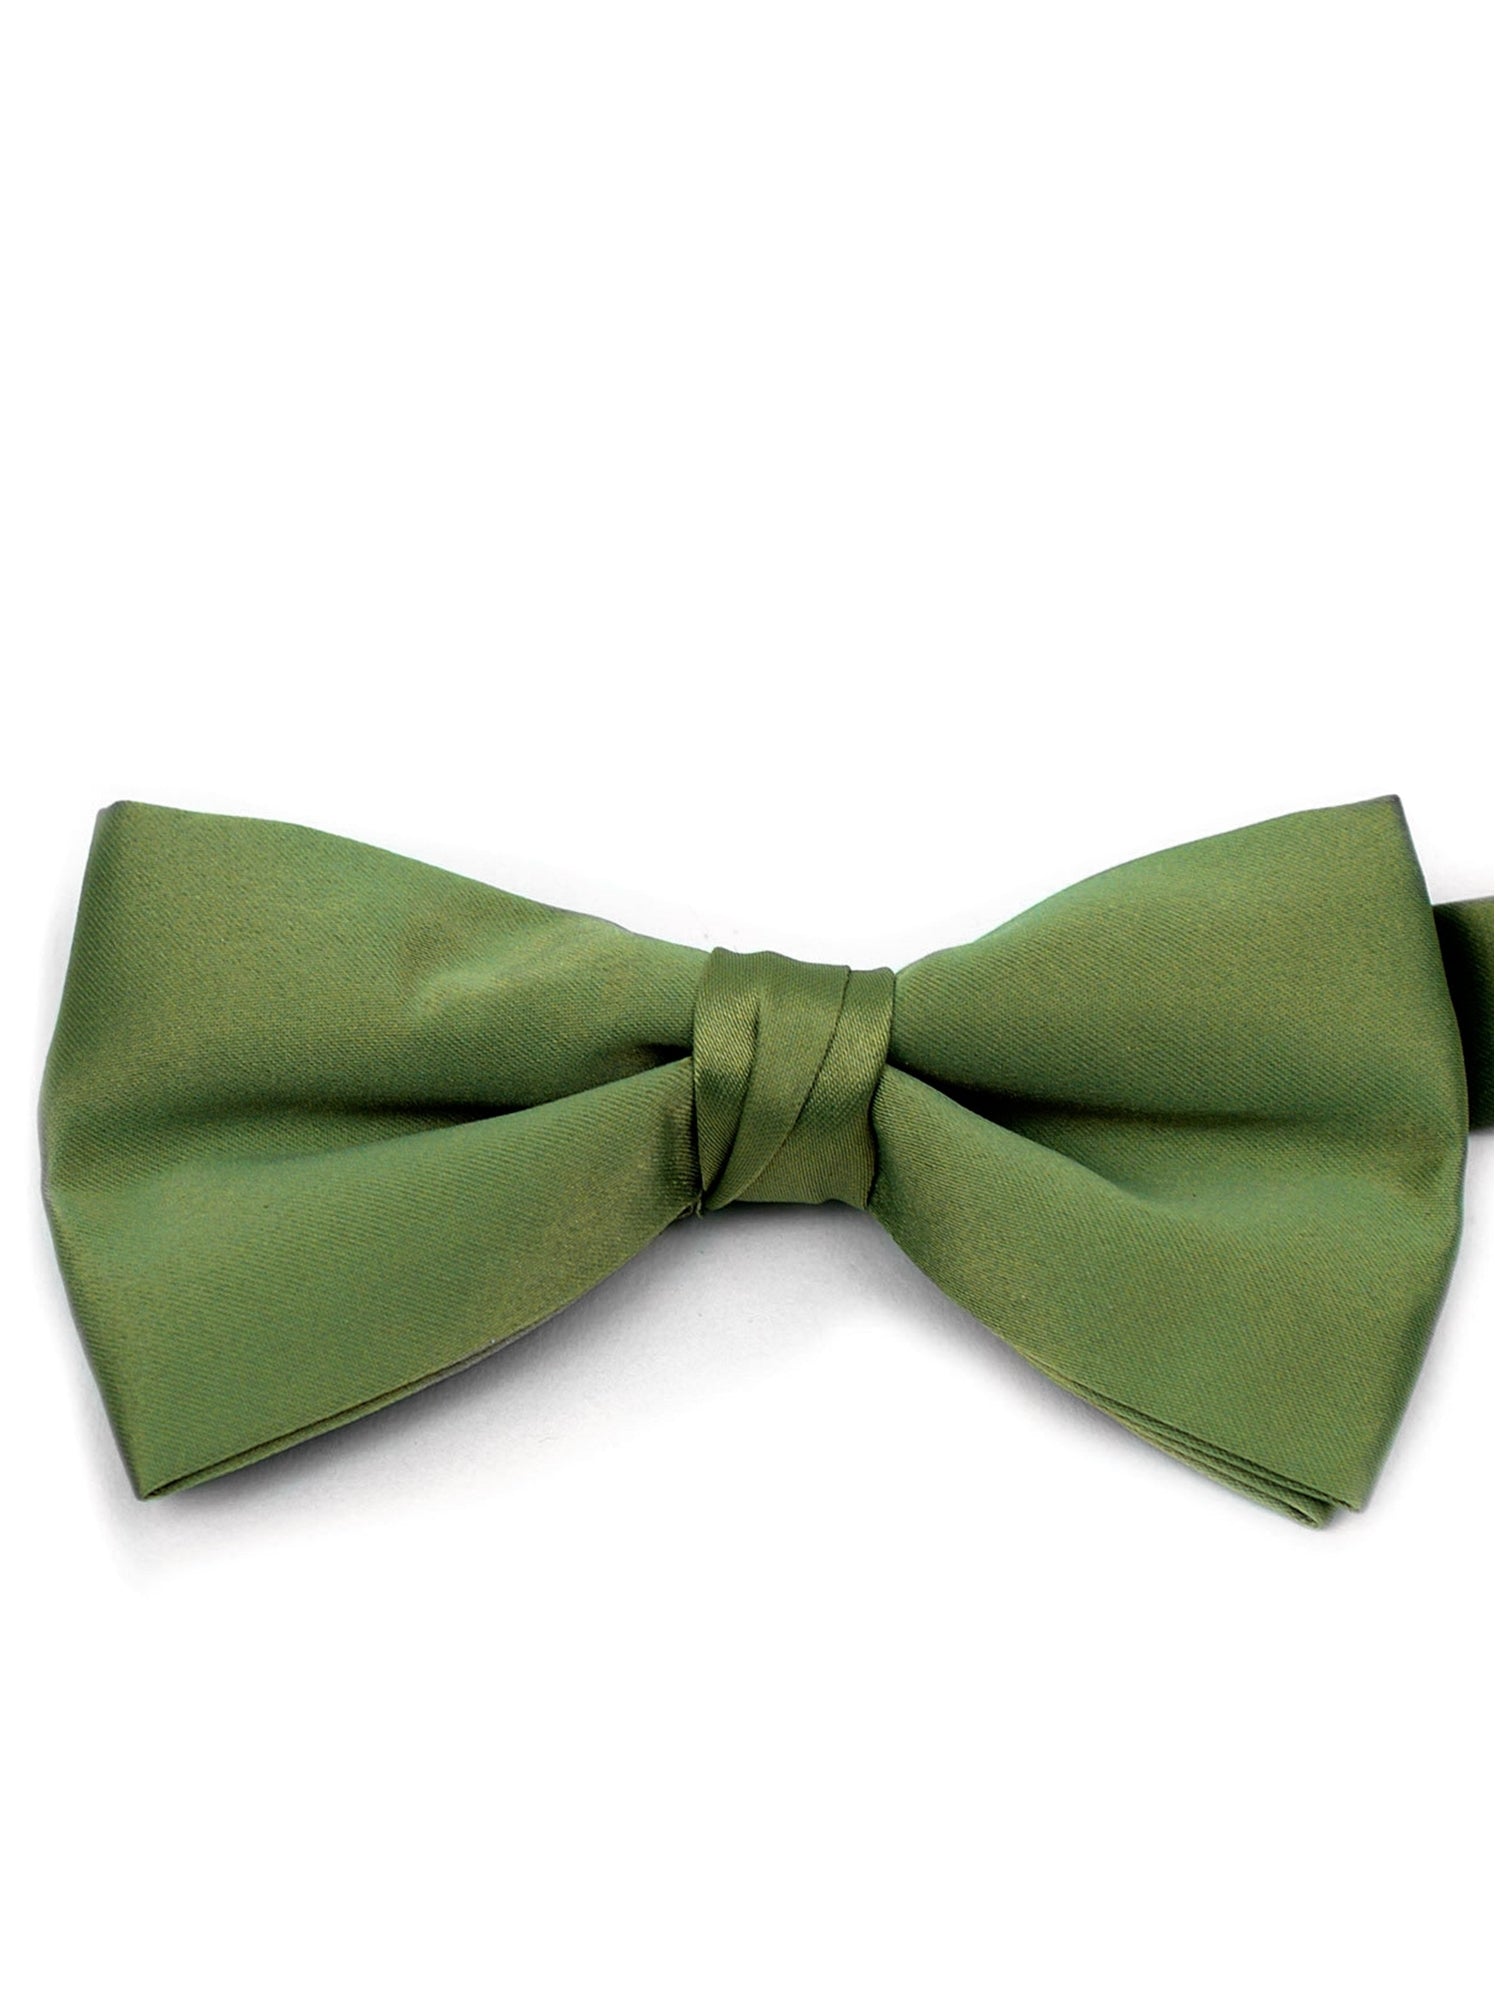 Men's Pre-tied Adjustable Length Bow Tie - Formal Tuxedo Solid Color Men's Solid Color Bow Tie TheDapperTie Olive One Size 